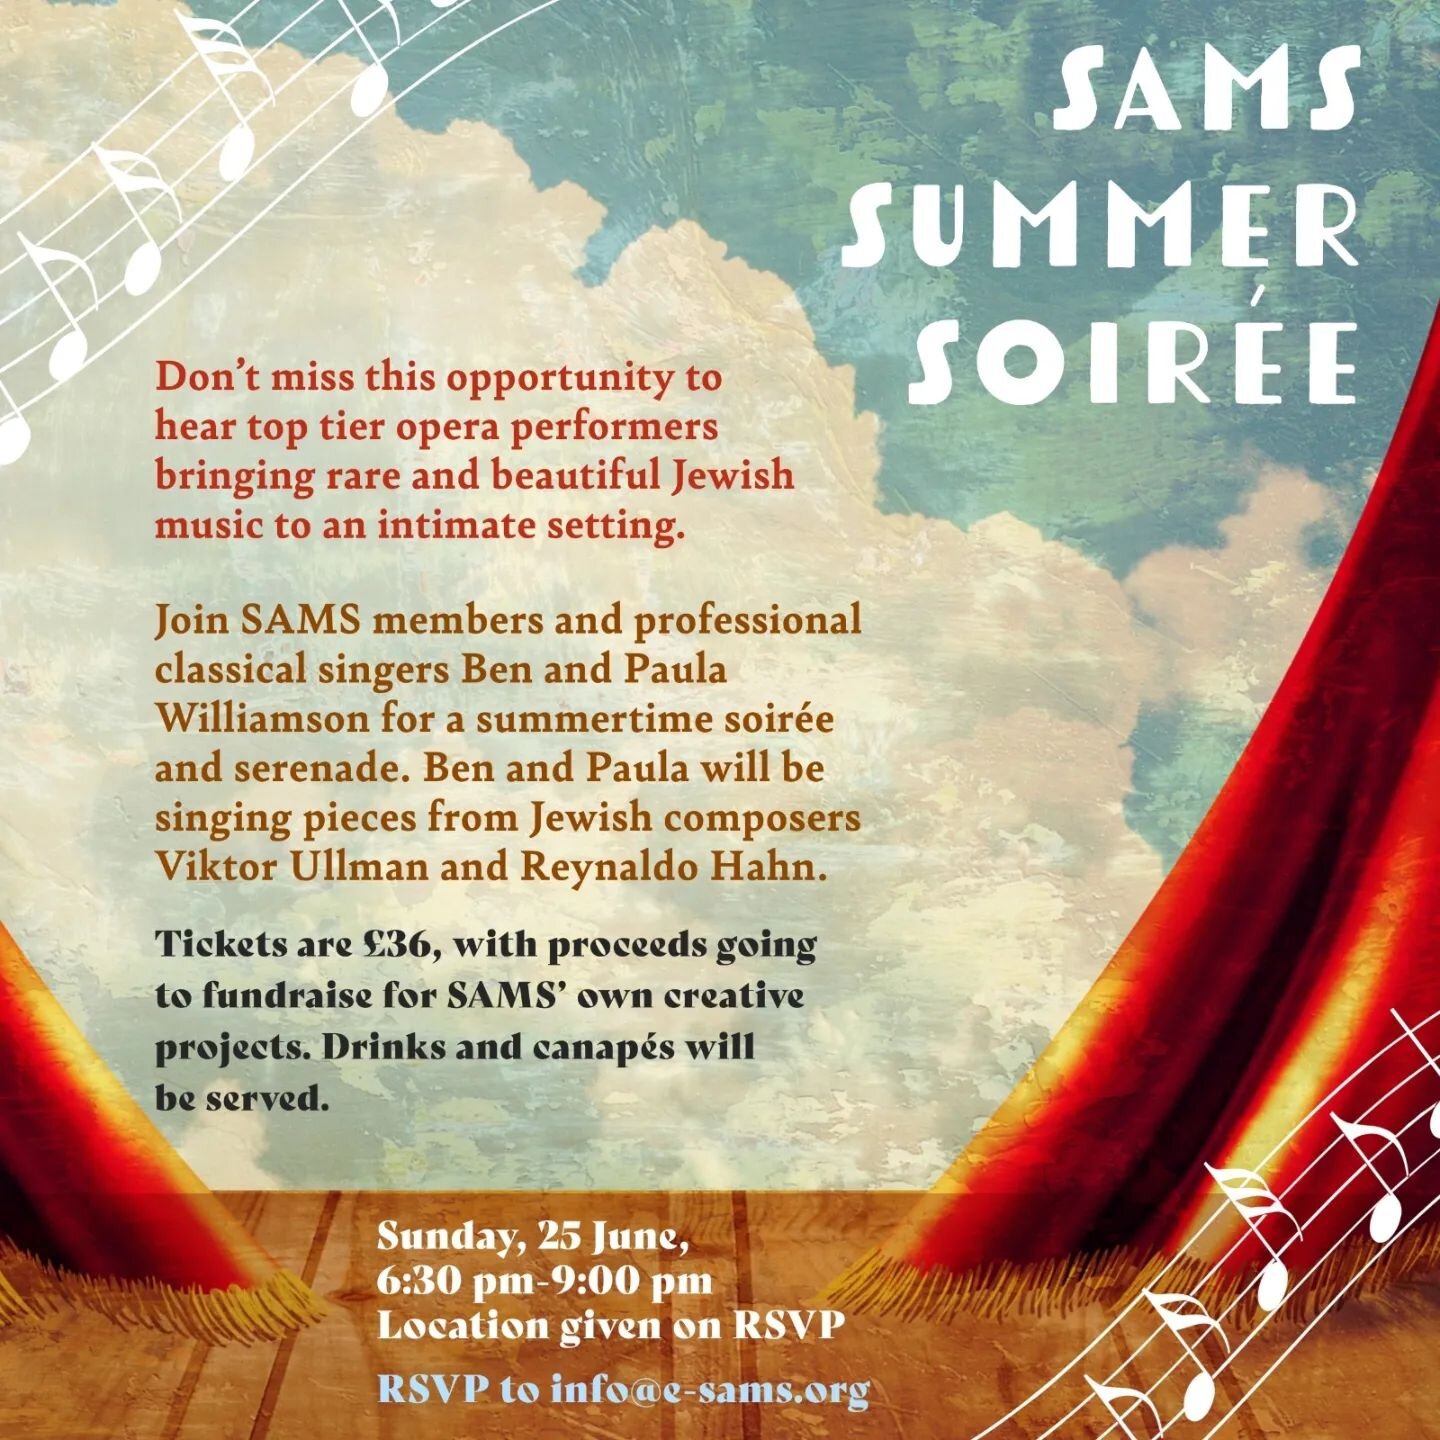 🎶 Very excited to announce something new coming up for SAMS this Summer! 

🎶 We're lucky to have the incredible operatic talents of Ben and Paula Williamson (Sides) for an intimate evening of rare Jewish classical vocal music, bubbly, and of course